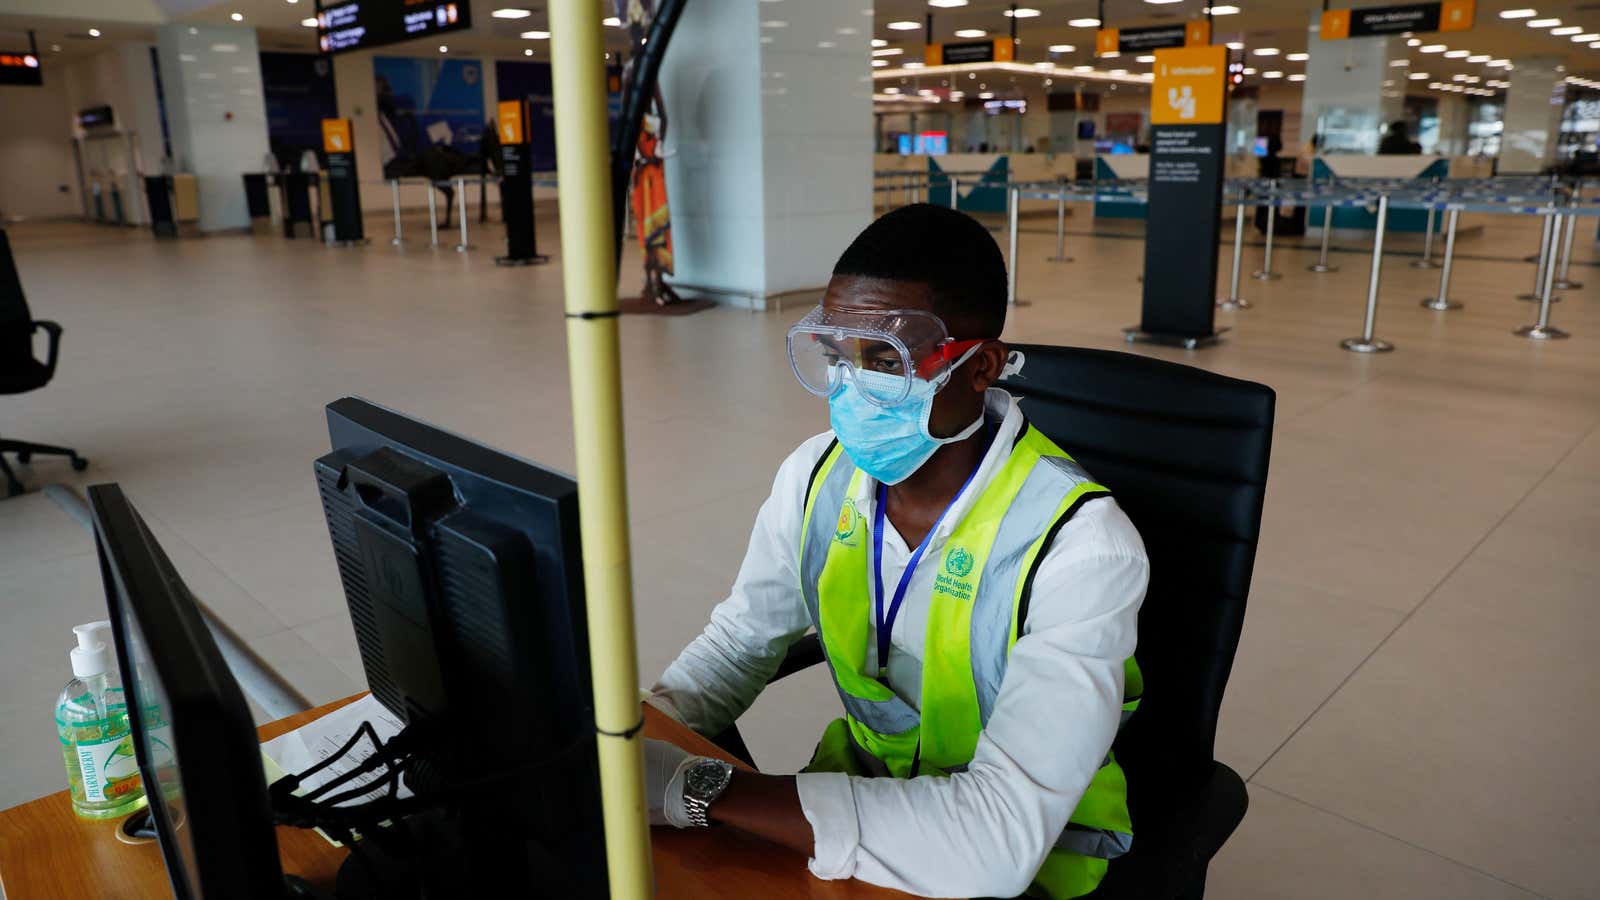 A health worker monitors a screen showing a thermal scan to check the temperatures of passengers at the Kotoka International Airport in Accra, Ghana